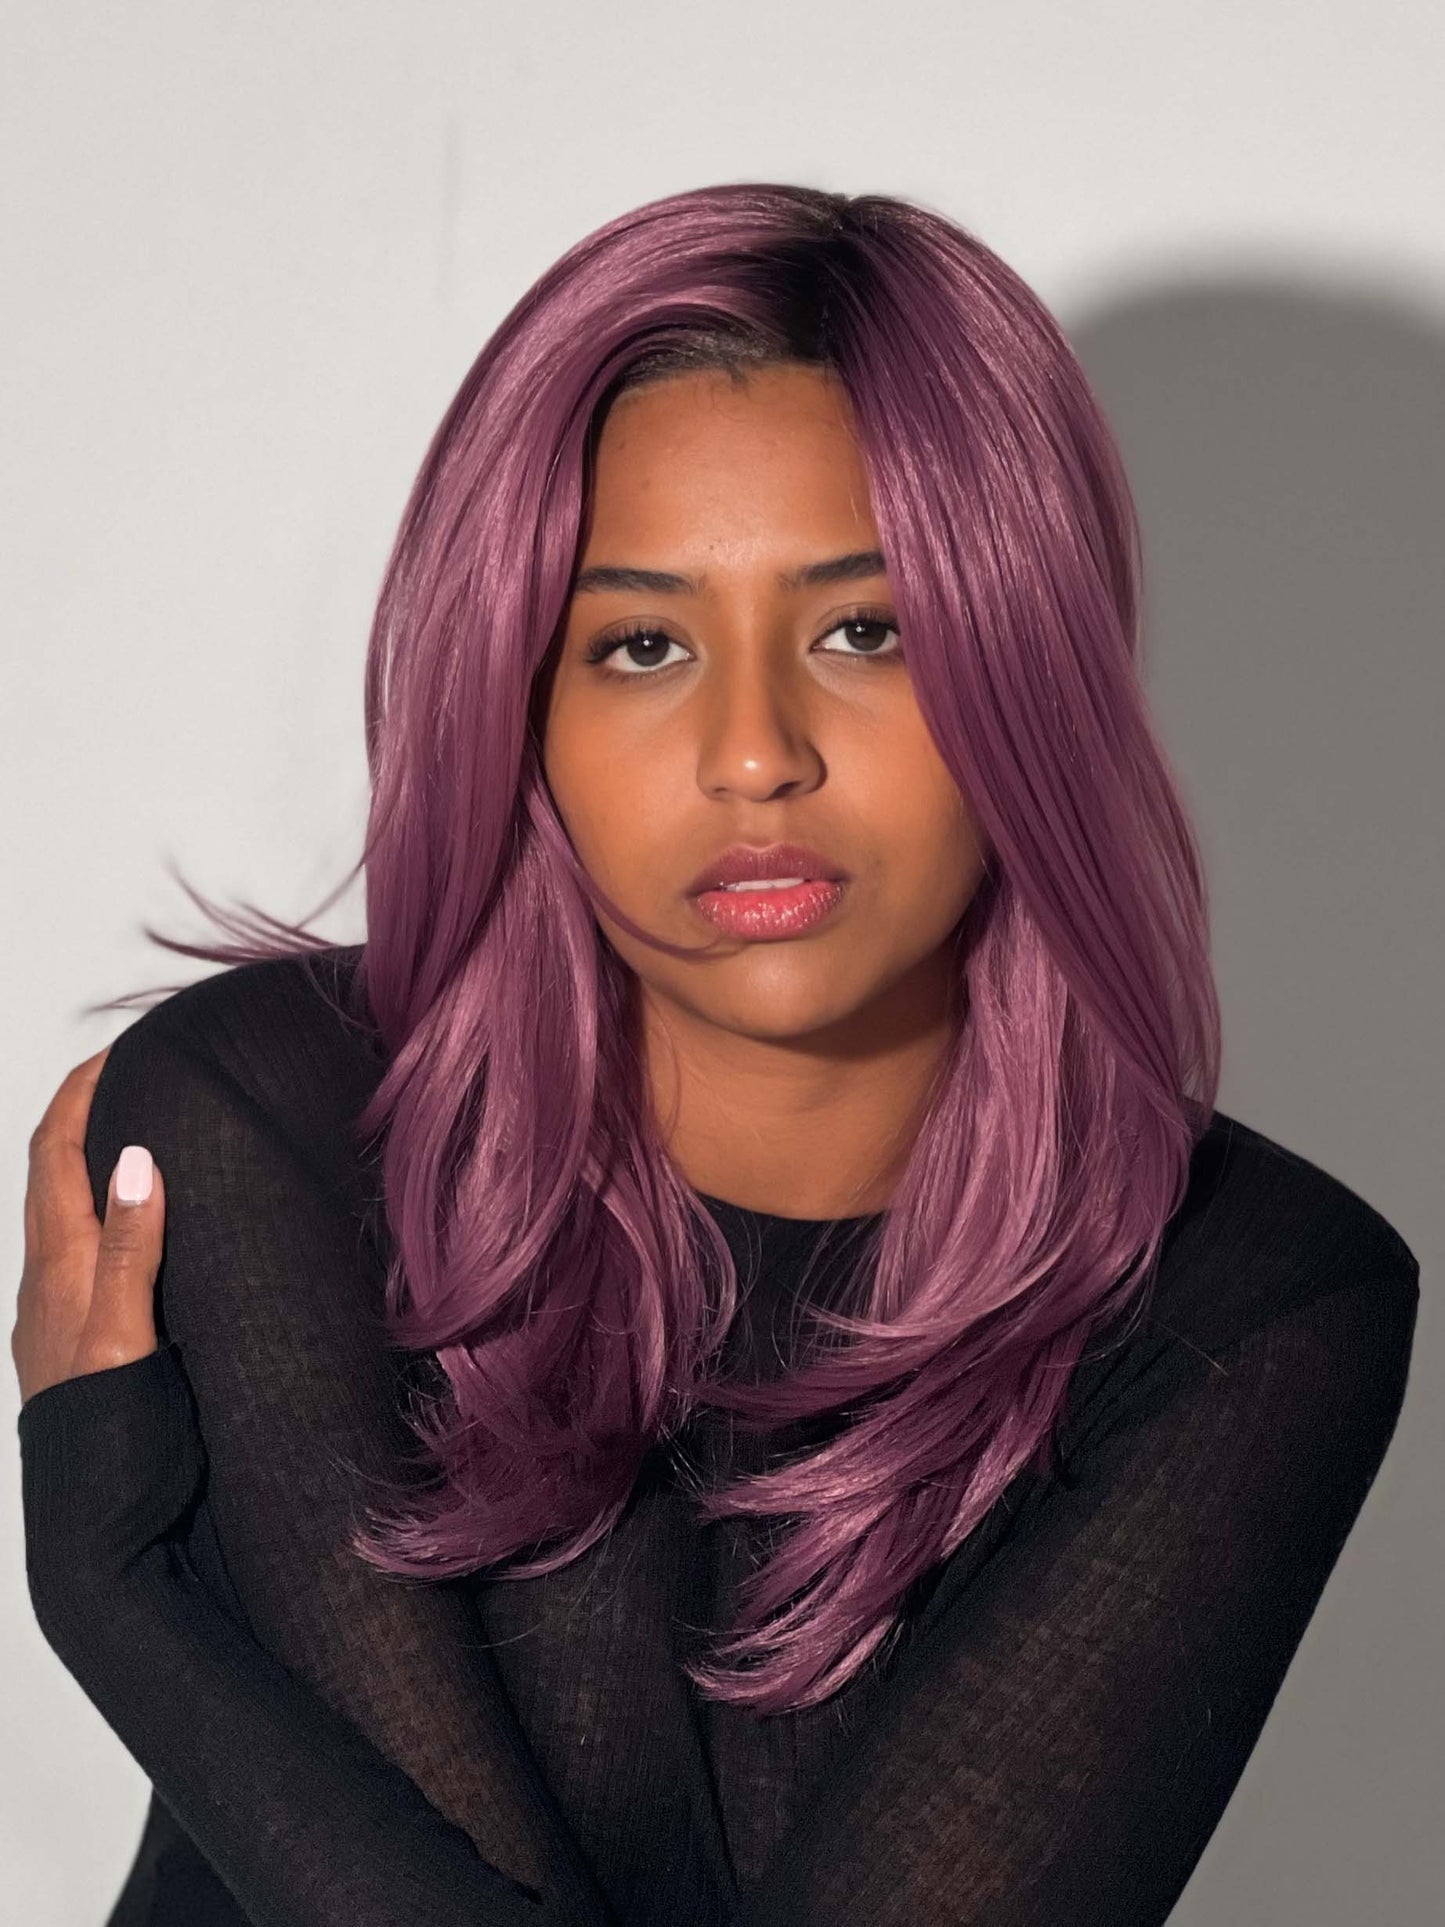 Sophia is wearing COSMO SLEEK by Rene of Paris in MAUVE BERRY | Smoky Fused Pale Violet Base with Medium Brown Roots